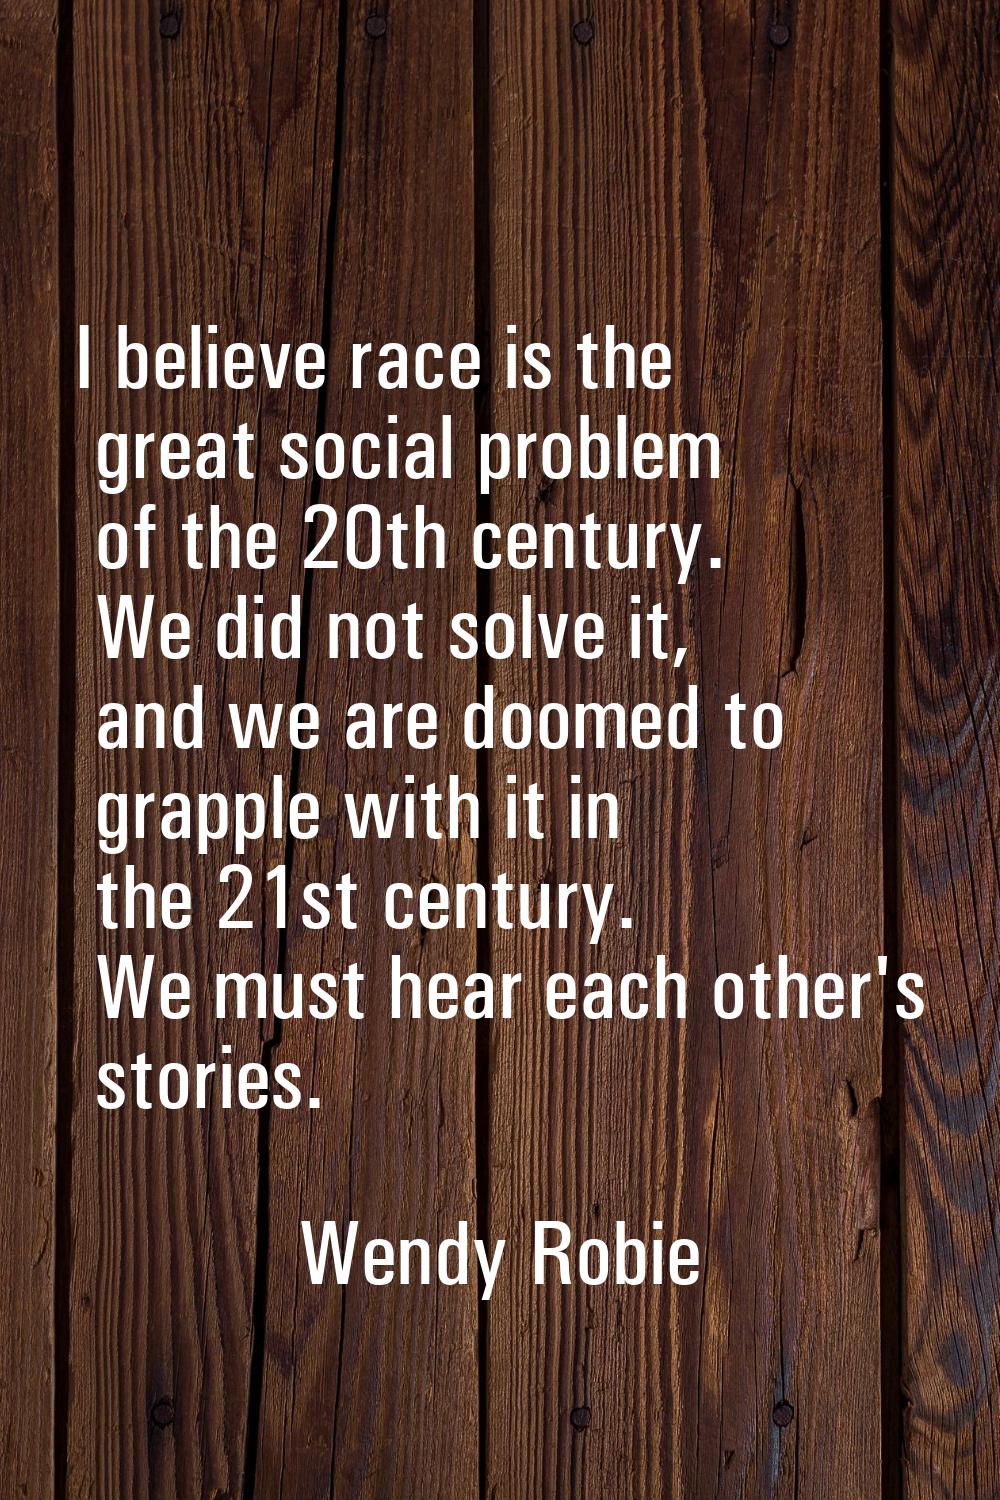 I believe race is the great social problem of the 20th century. We did not solve it, and we are doo